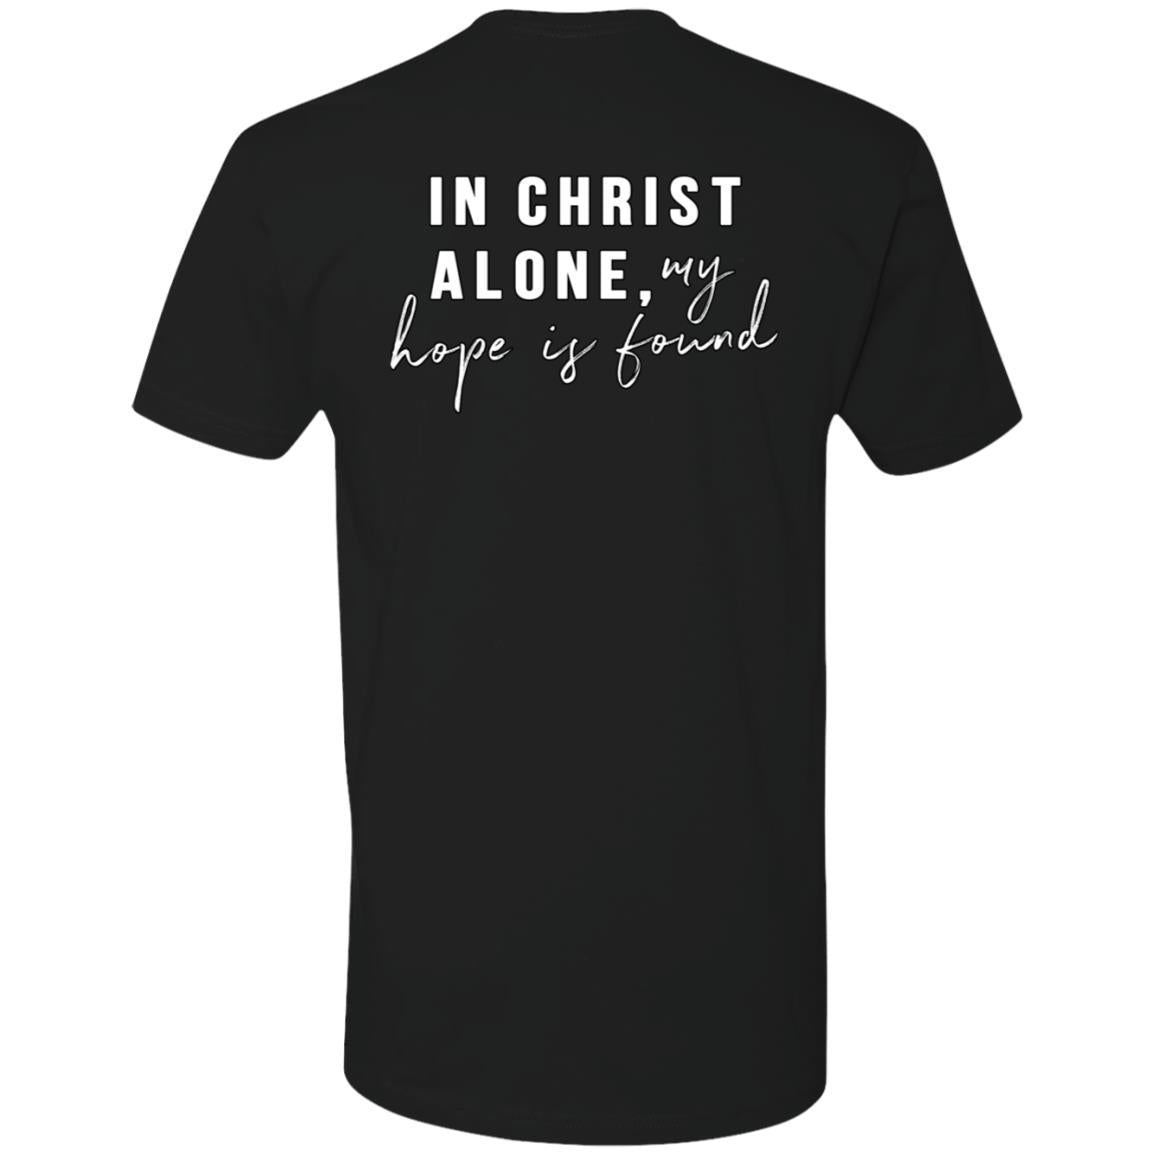 In Christ Alone (Unisex Tee)